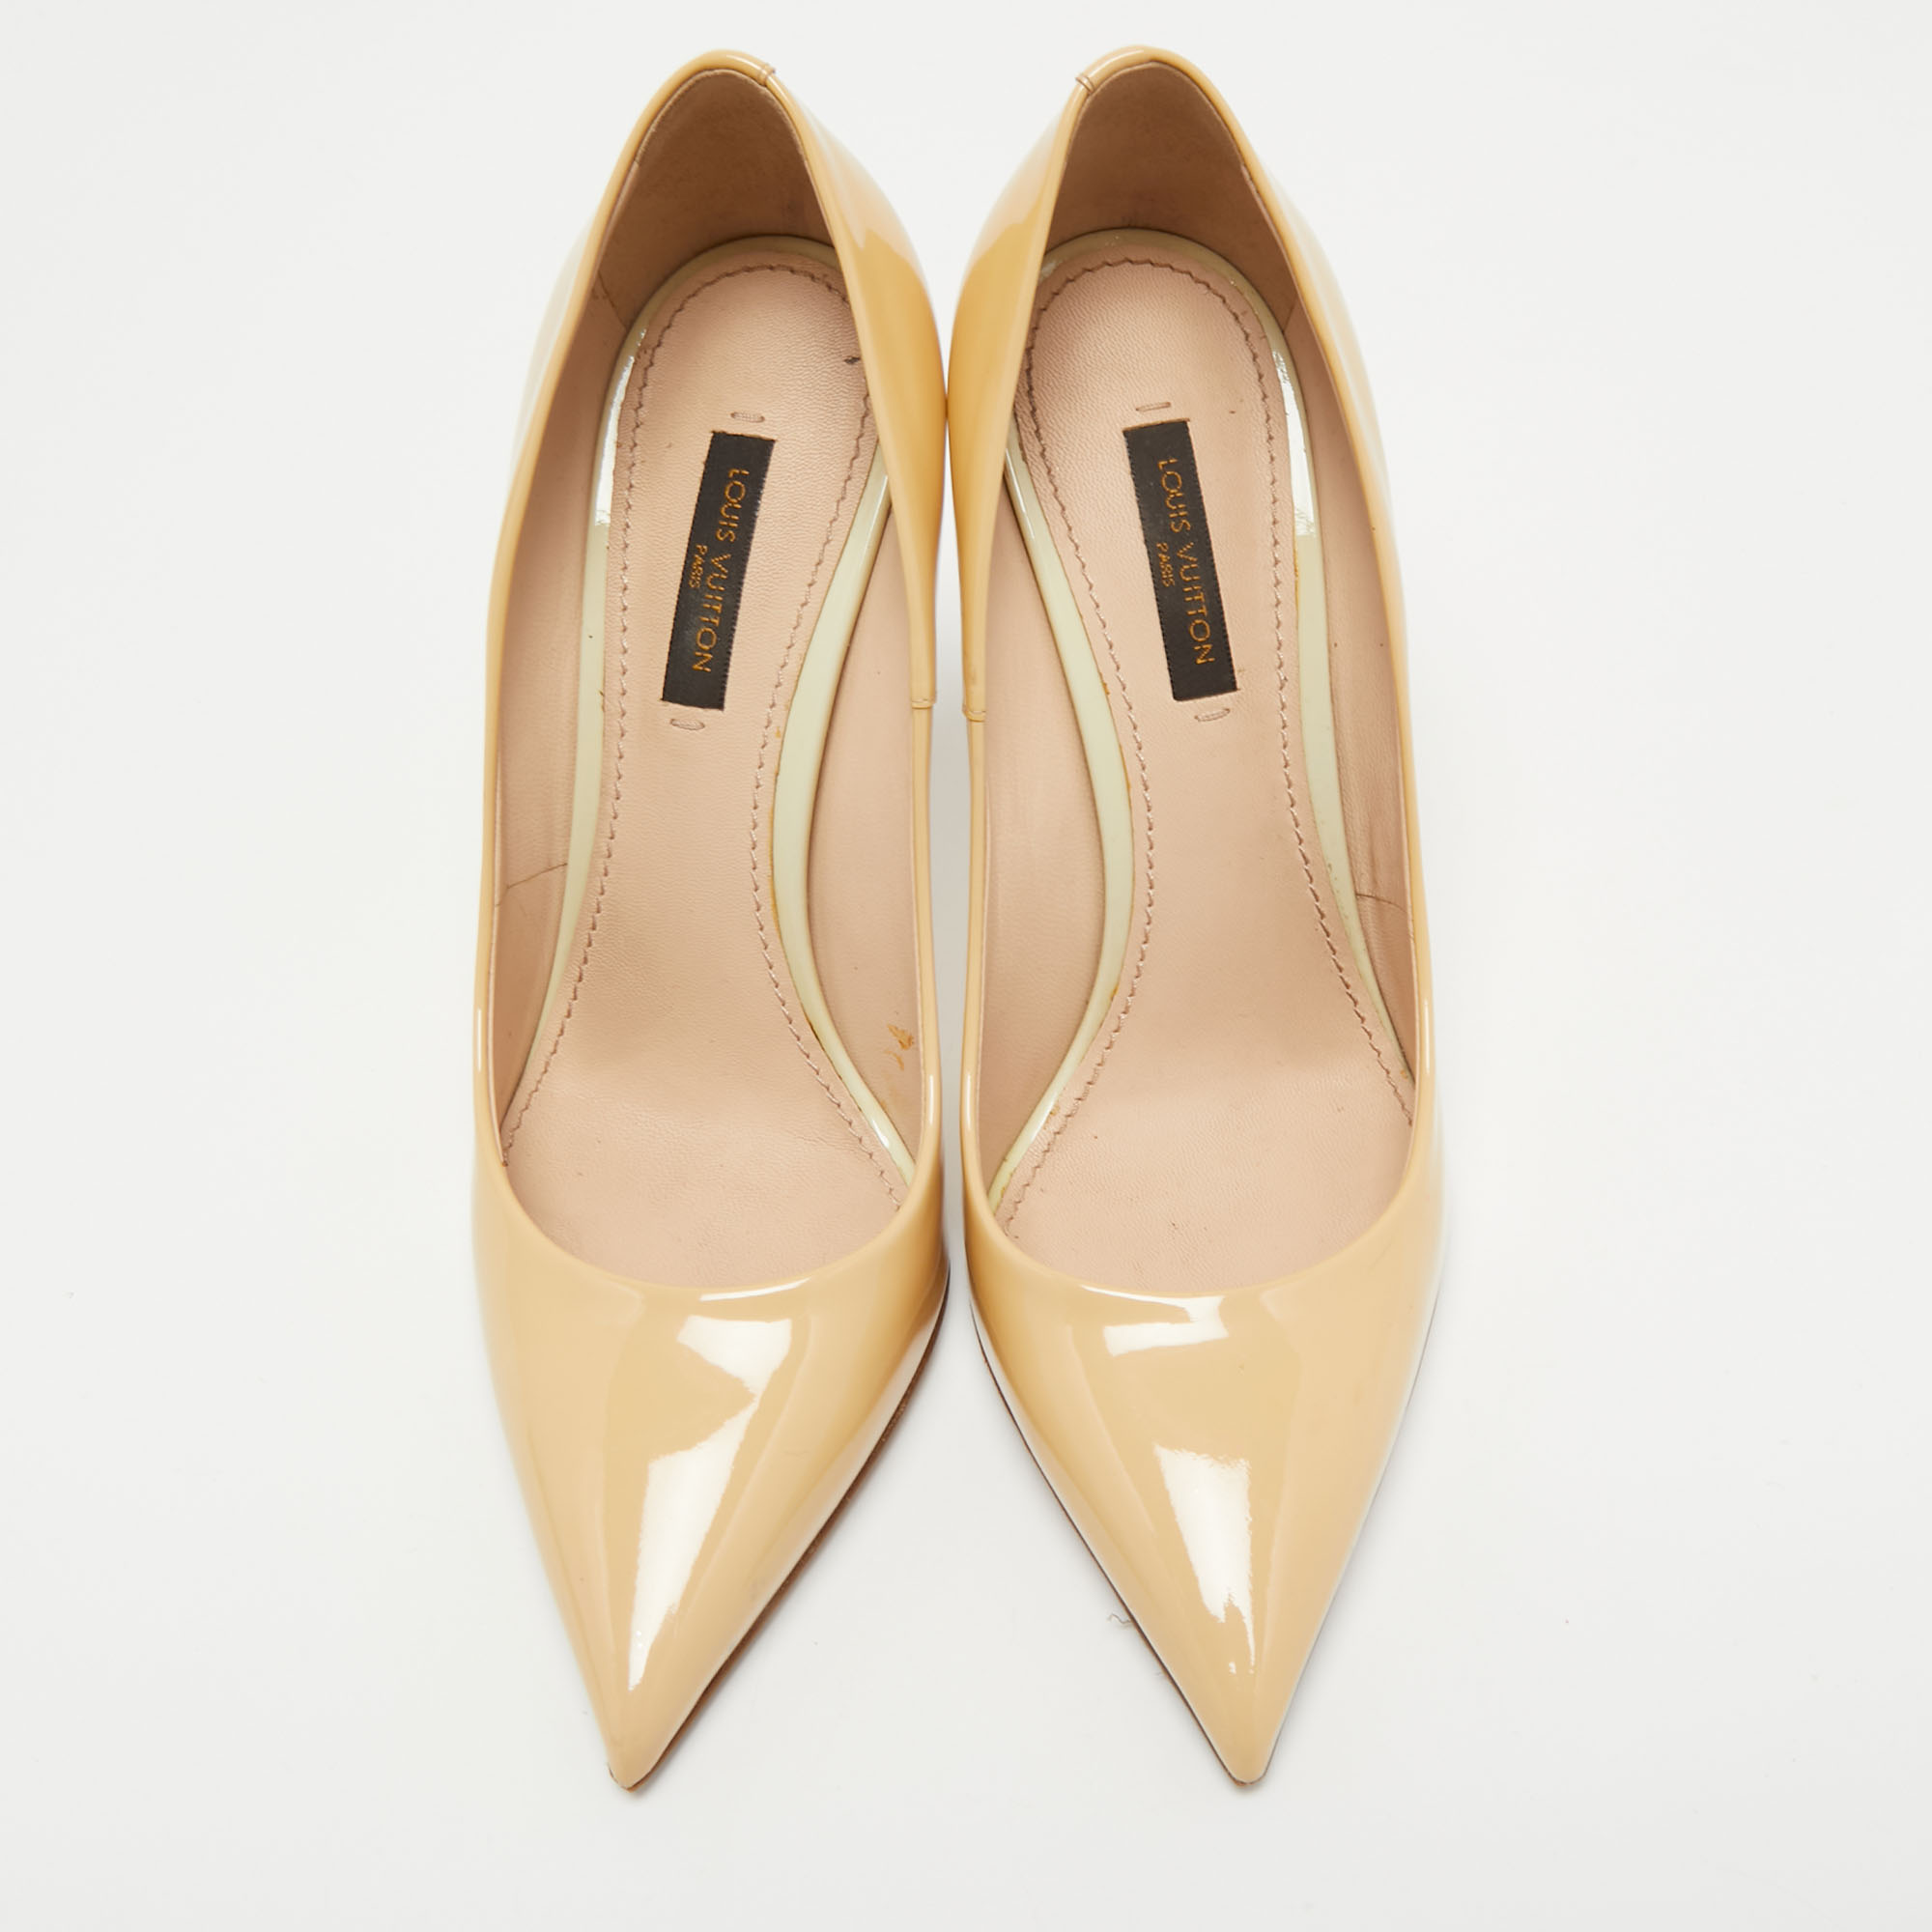 Louis Vuitton Beige Patent Leather Eyeline Pointed Toe Pumps Size 37